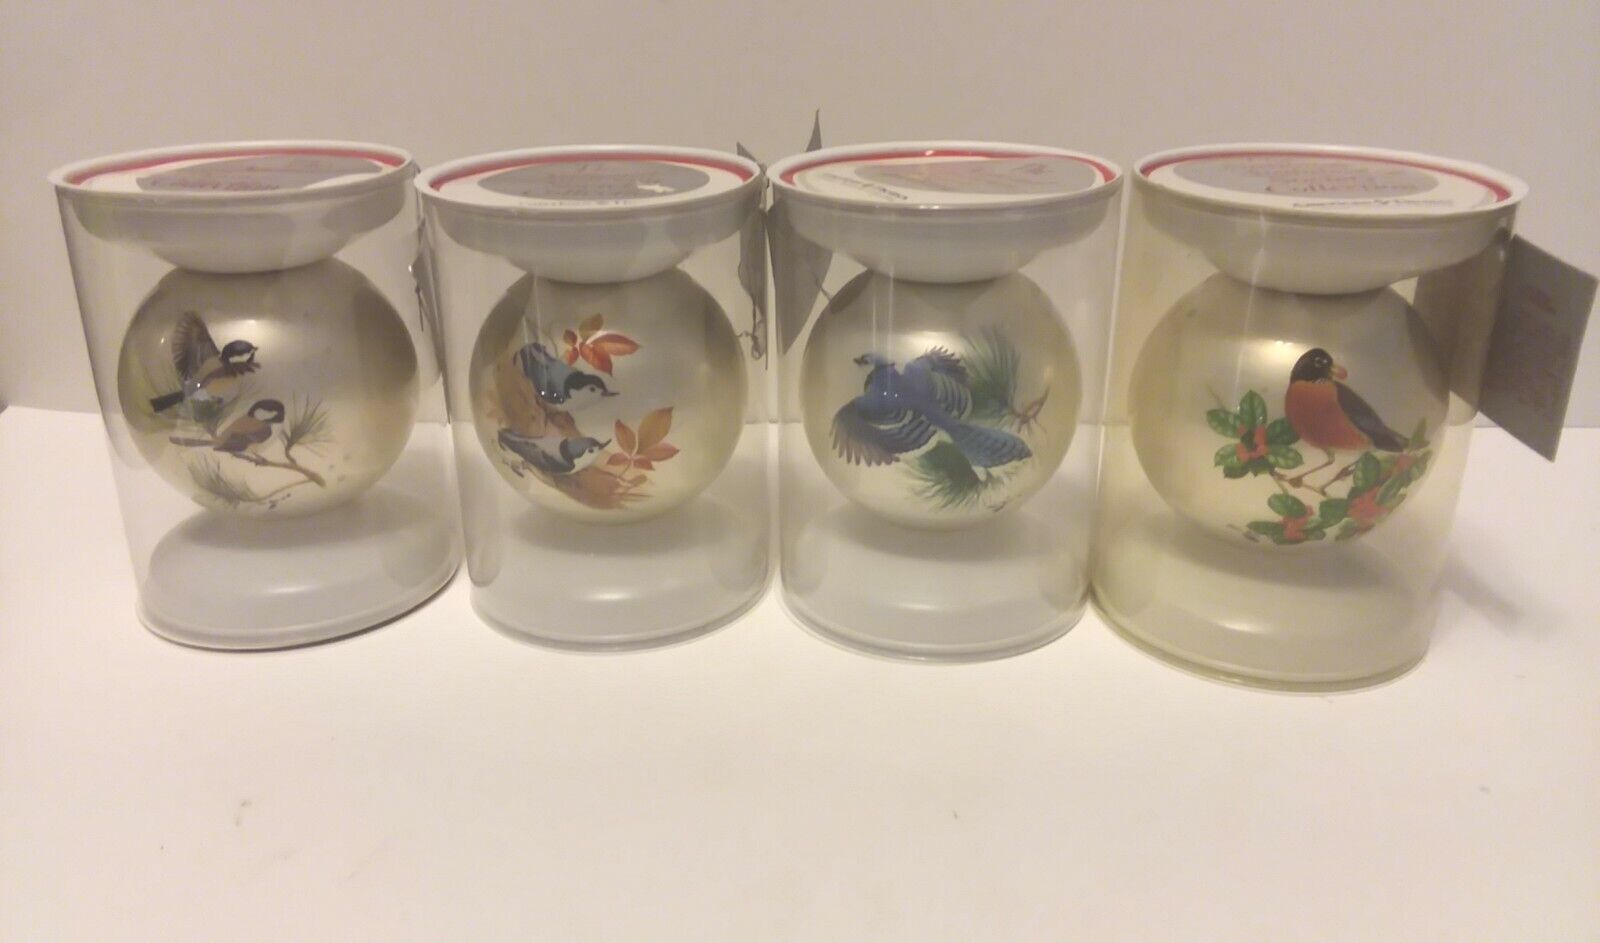 Mixed Lot of 4 National Audubon Society Ornaments w/ Original Containers Birds